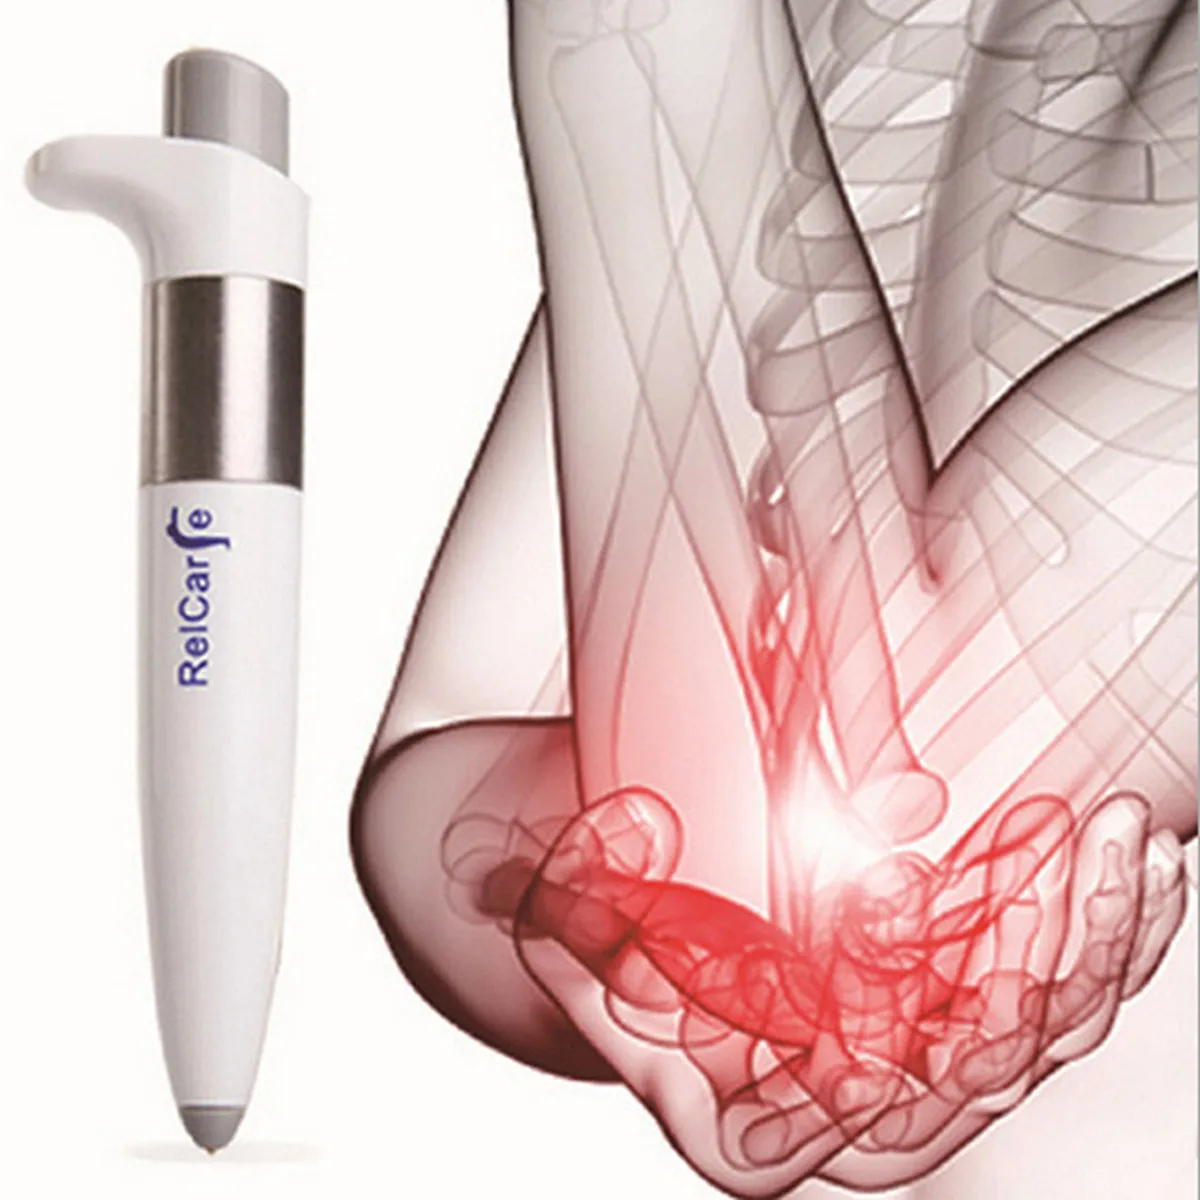 

Handhled Body Pain Relief Analgesia Pulse Pen Portable Acupuncture Arthritis Joint Massager Relaxation Treatment Massage Pen